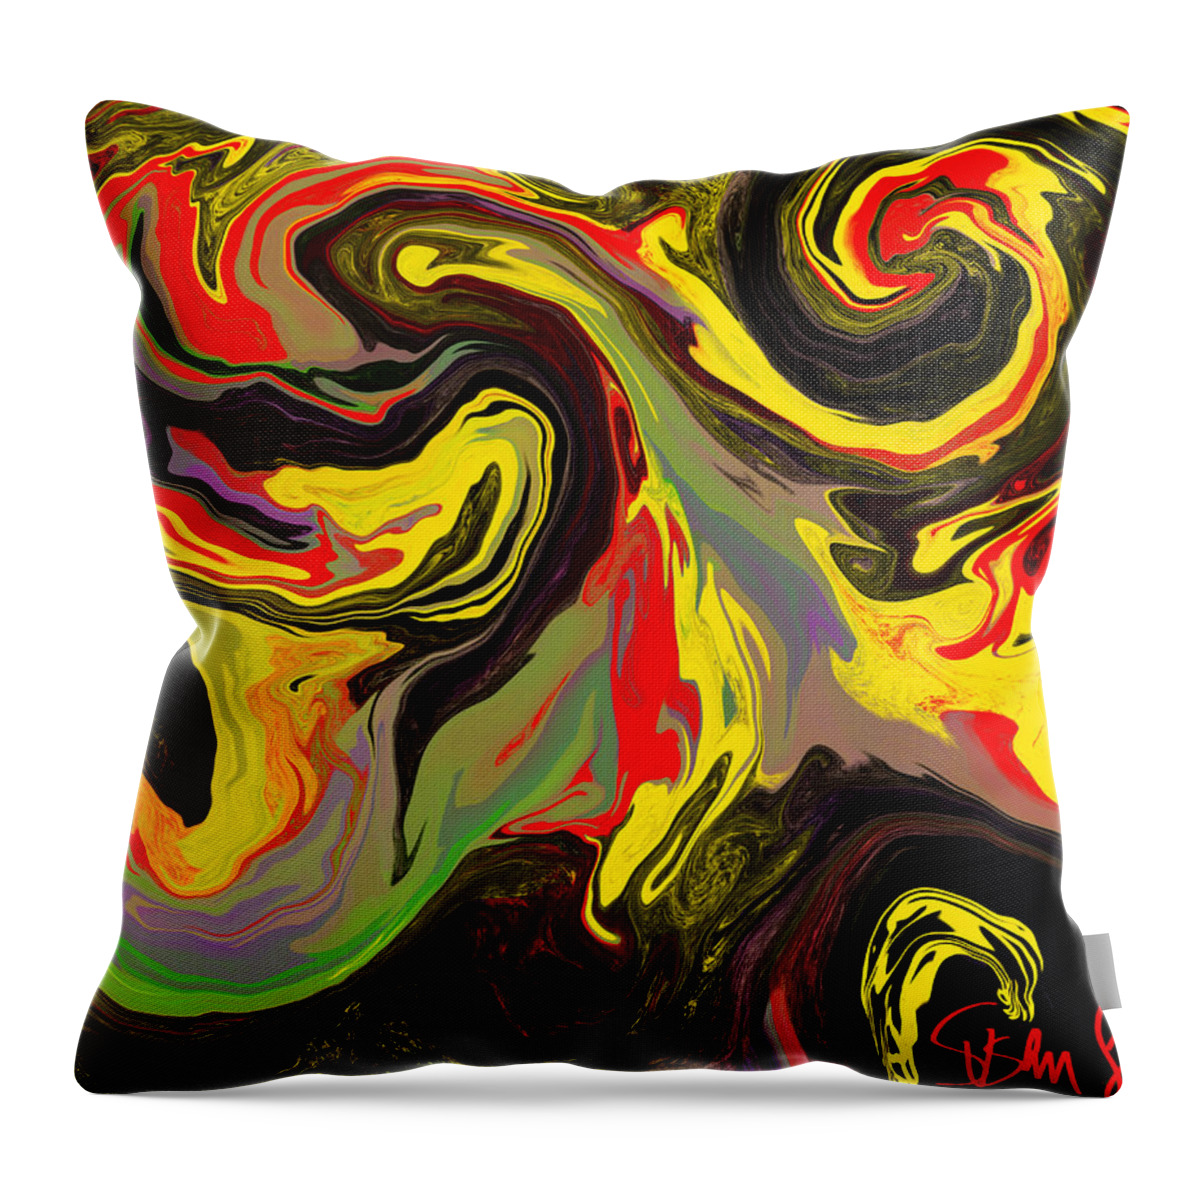 Go With The Flow Throw Pillow featuring the digital art Sporadic Excitement by Susan Fielder